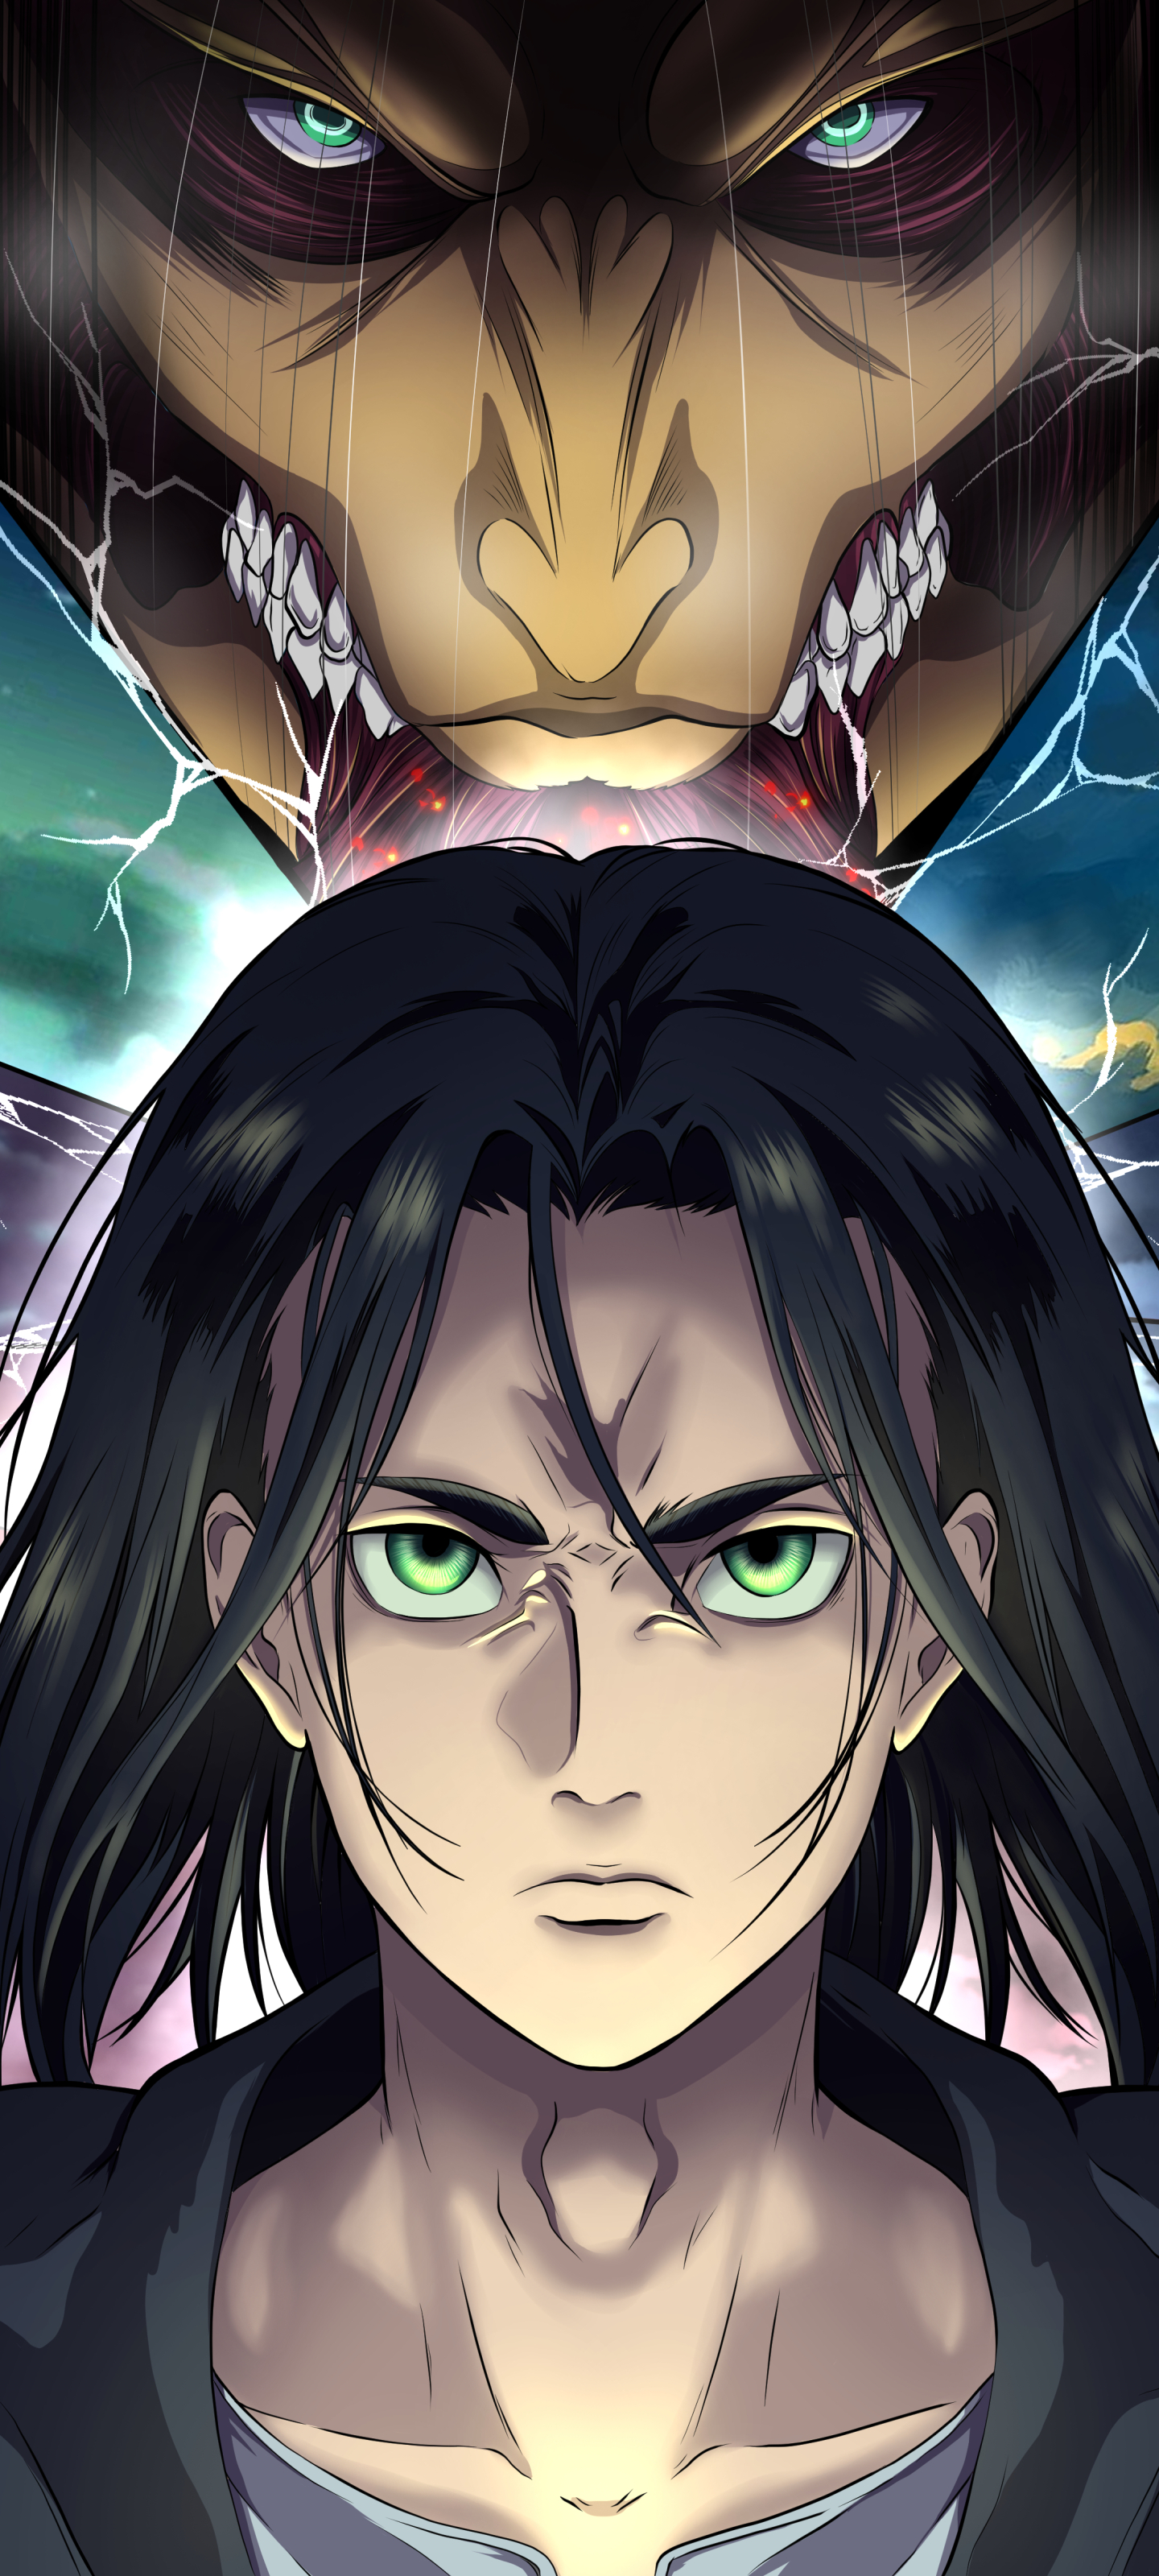 Anime Attack On Titan Phone Wallpaper by Boredthings